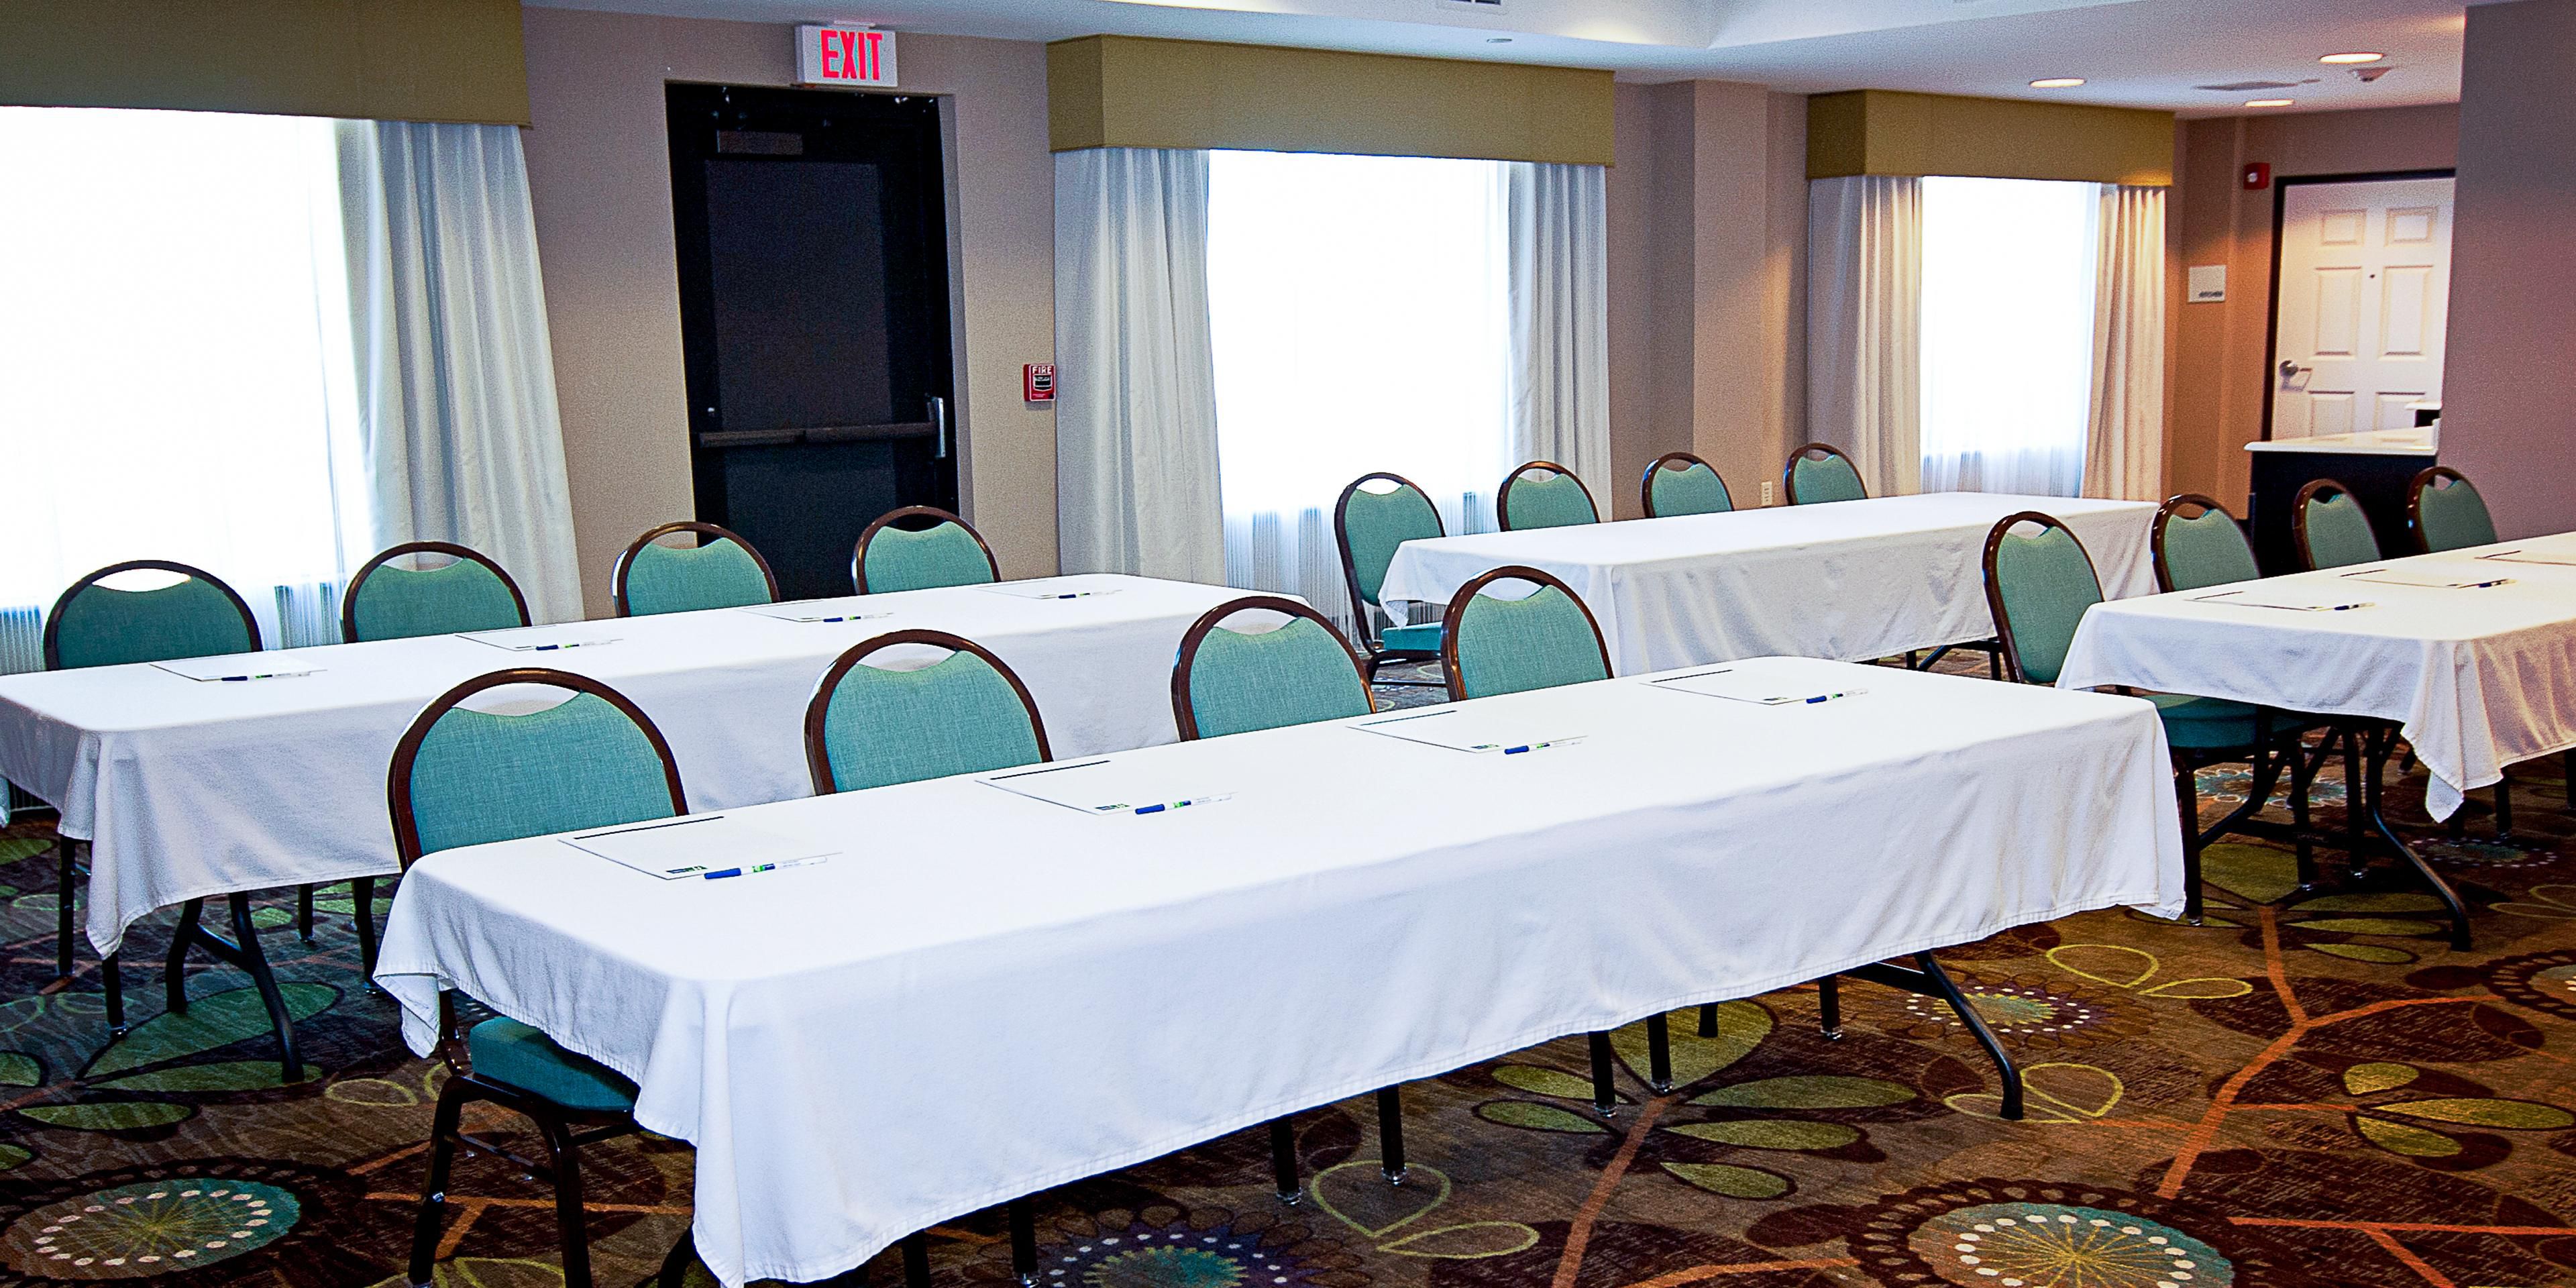 Our spacious meeting room is a great place to hold your meetings while your employees enjoy a great place to stay. A patio with a fire pit is right outside for those quick pick me up break times. Contact our sales department today for more booking information.